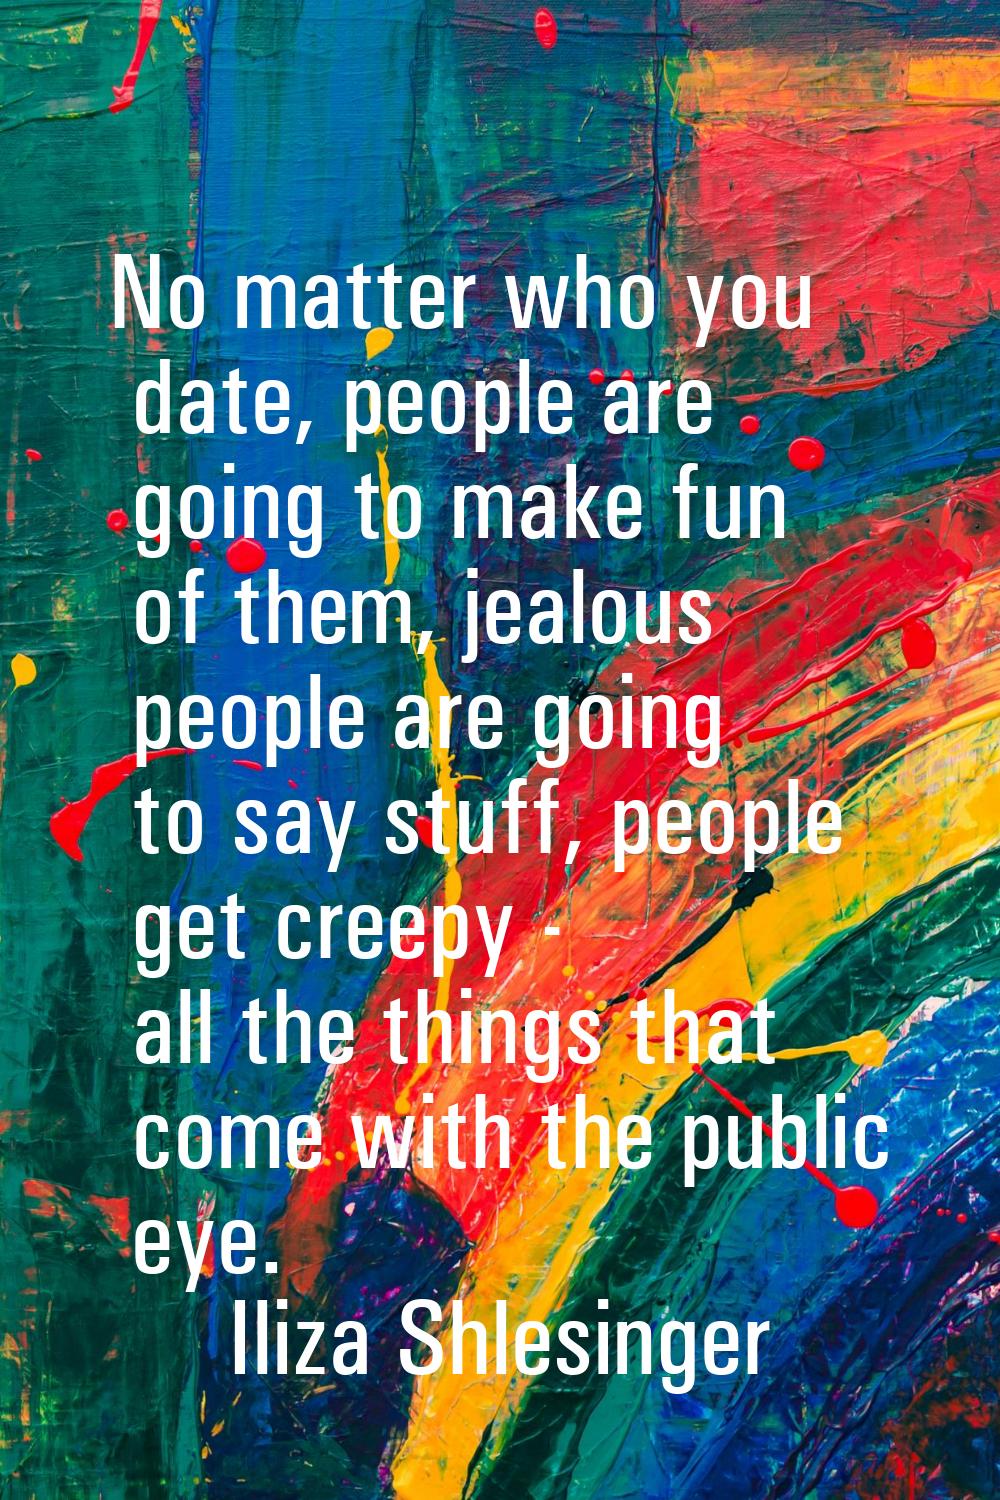 No matter who you date, people are going to make fun of them, jealous people are going to say stuff